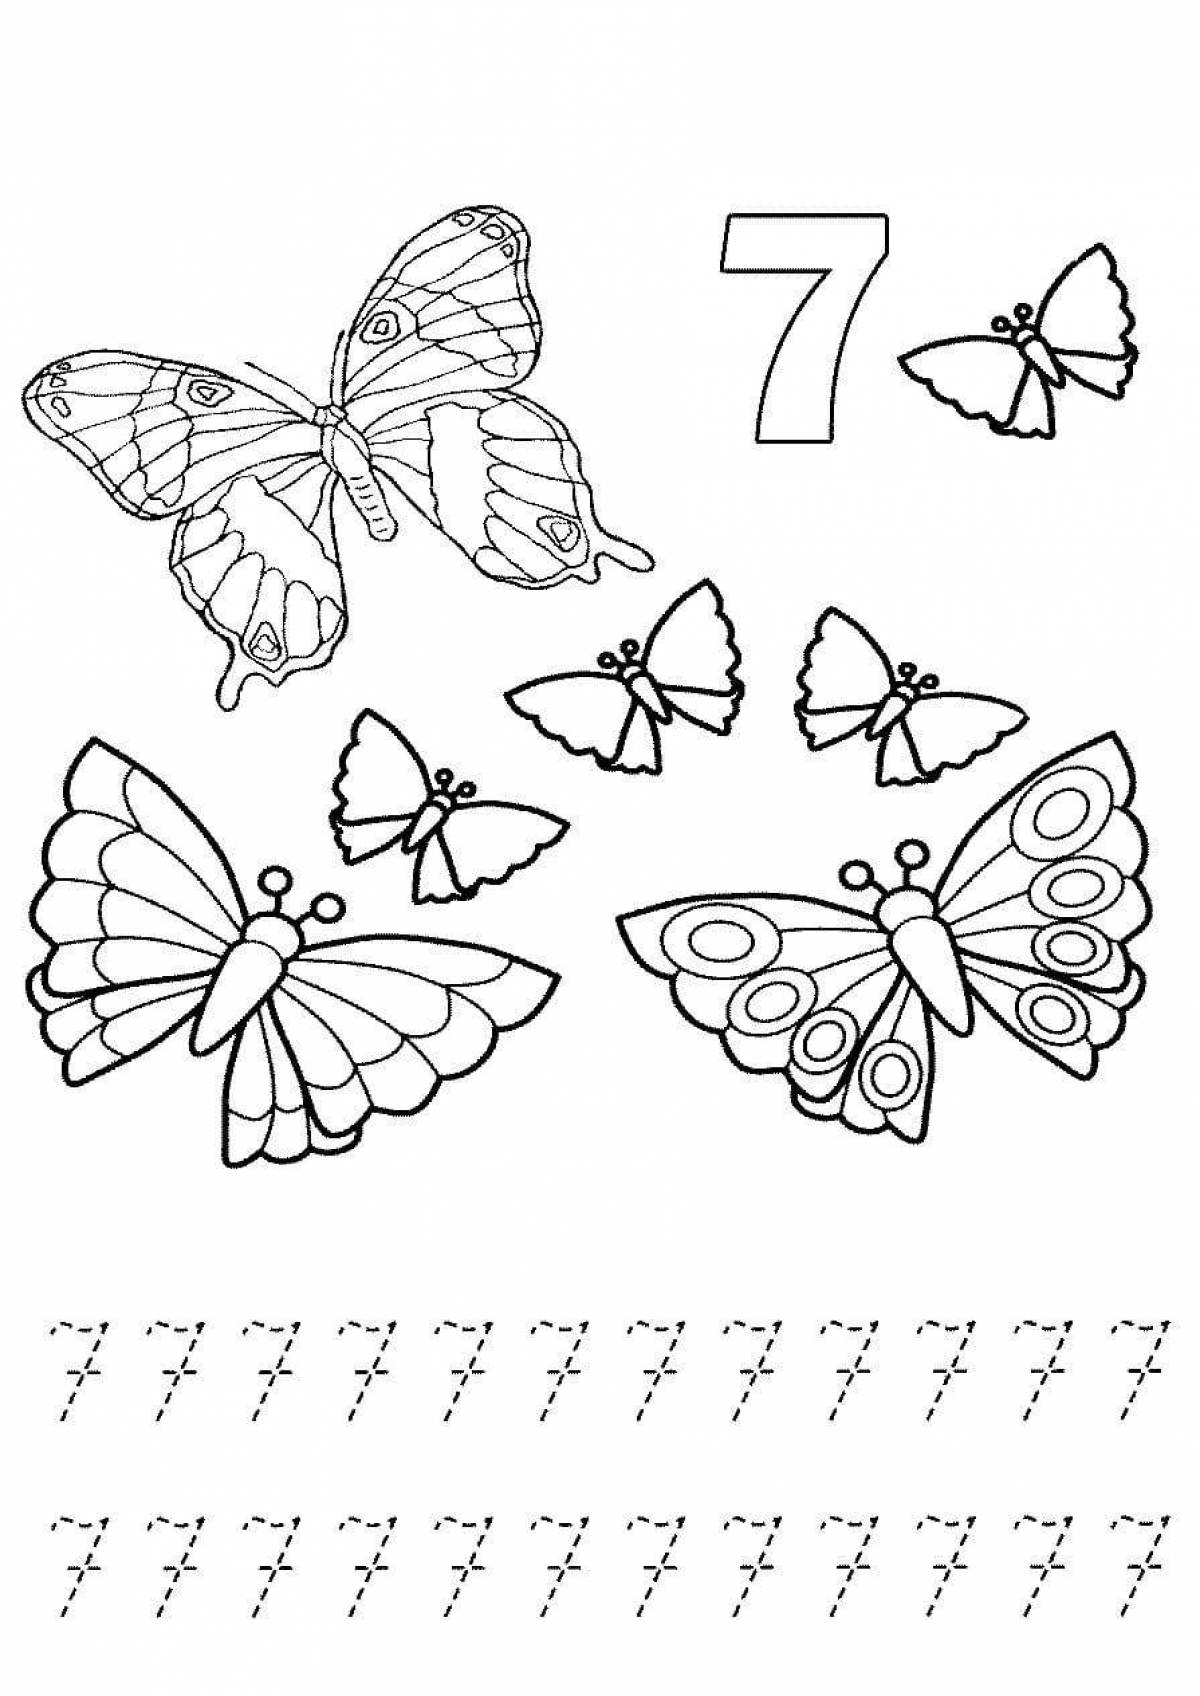 Crazy coloring pages for kids 5-7 years old